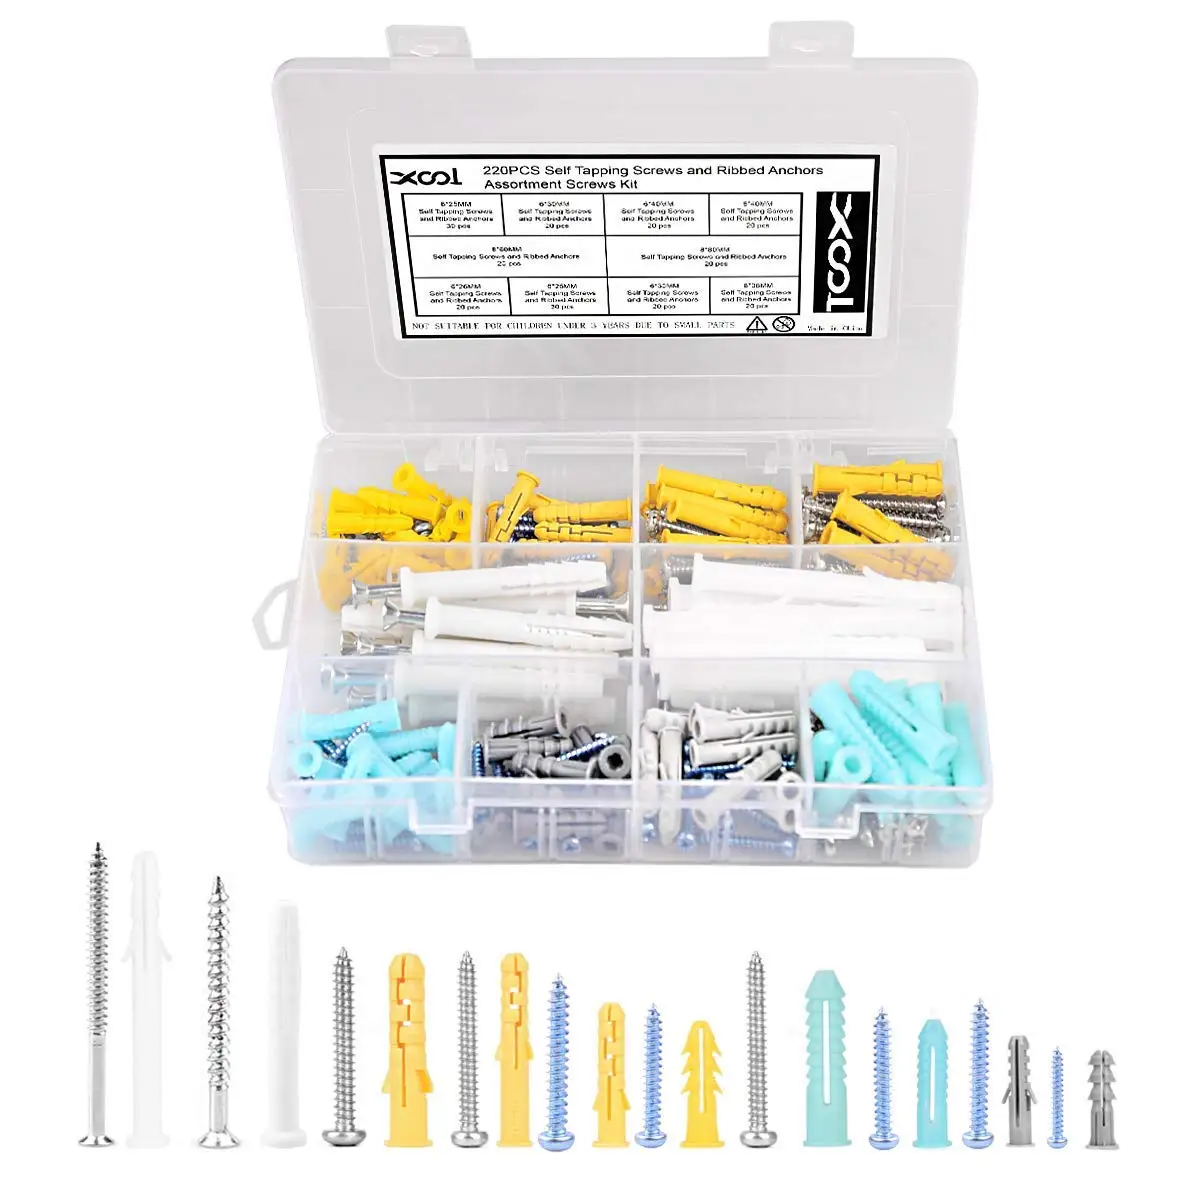 6# 1-1//8 Plastic Drywall Wall Anchor Screws Assortment Kit with Hollow-Wall Anchors with Self Tapping Screws Plastic Self Drilling 40 pcs